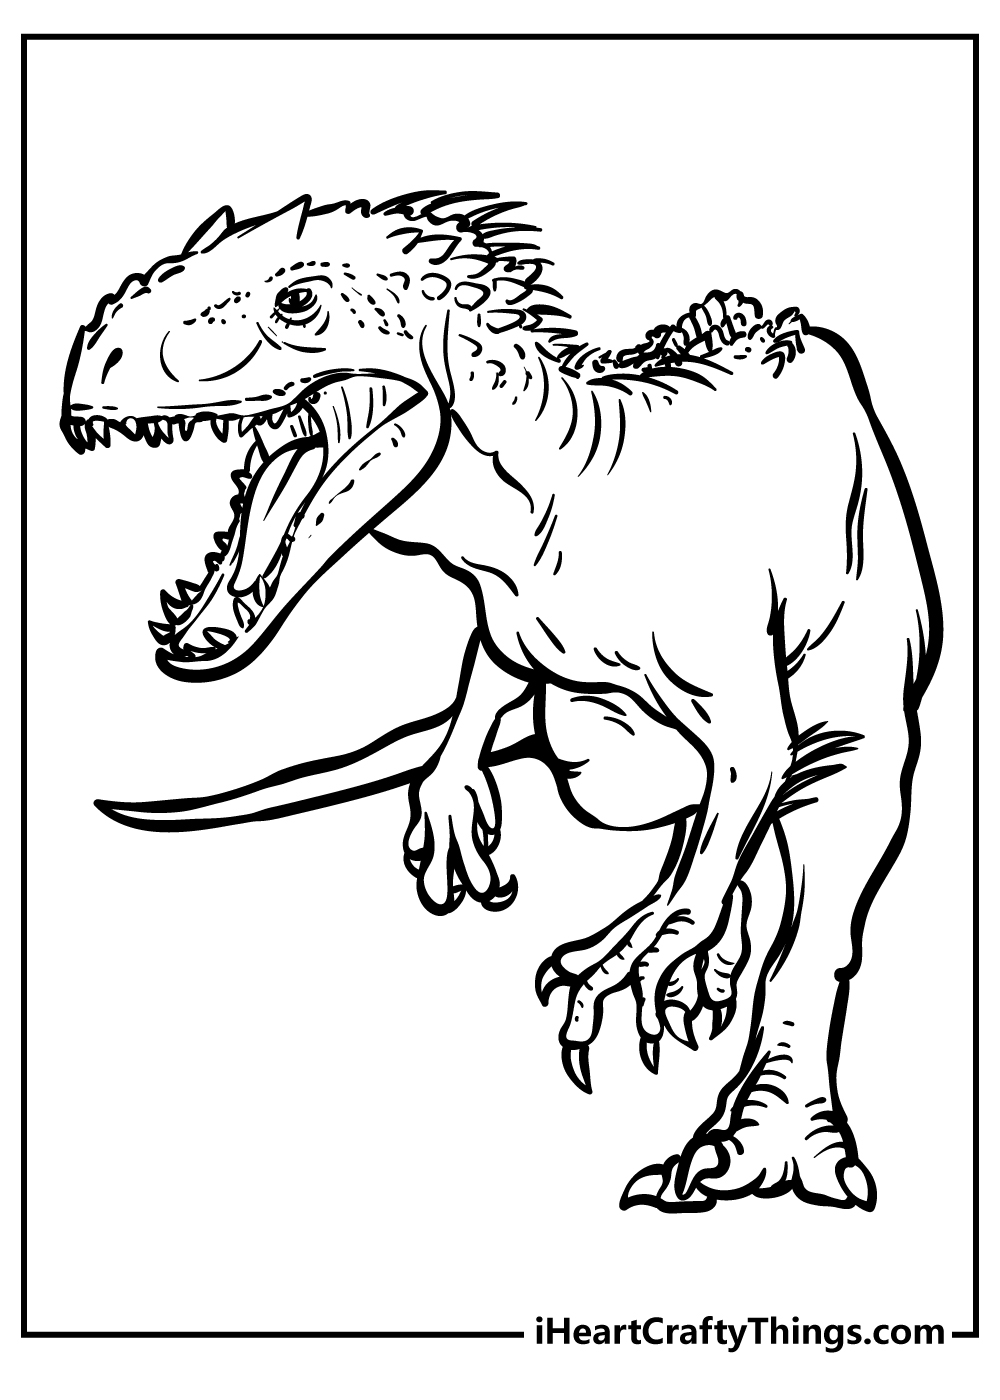 Jurassic World Coloring Sheet for children free download